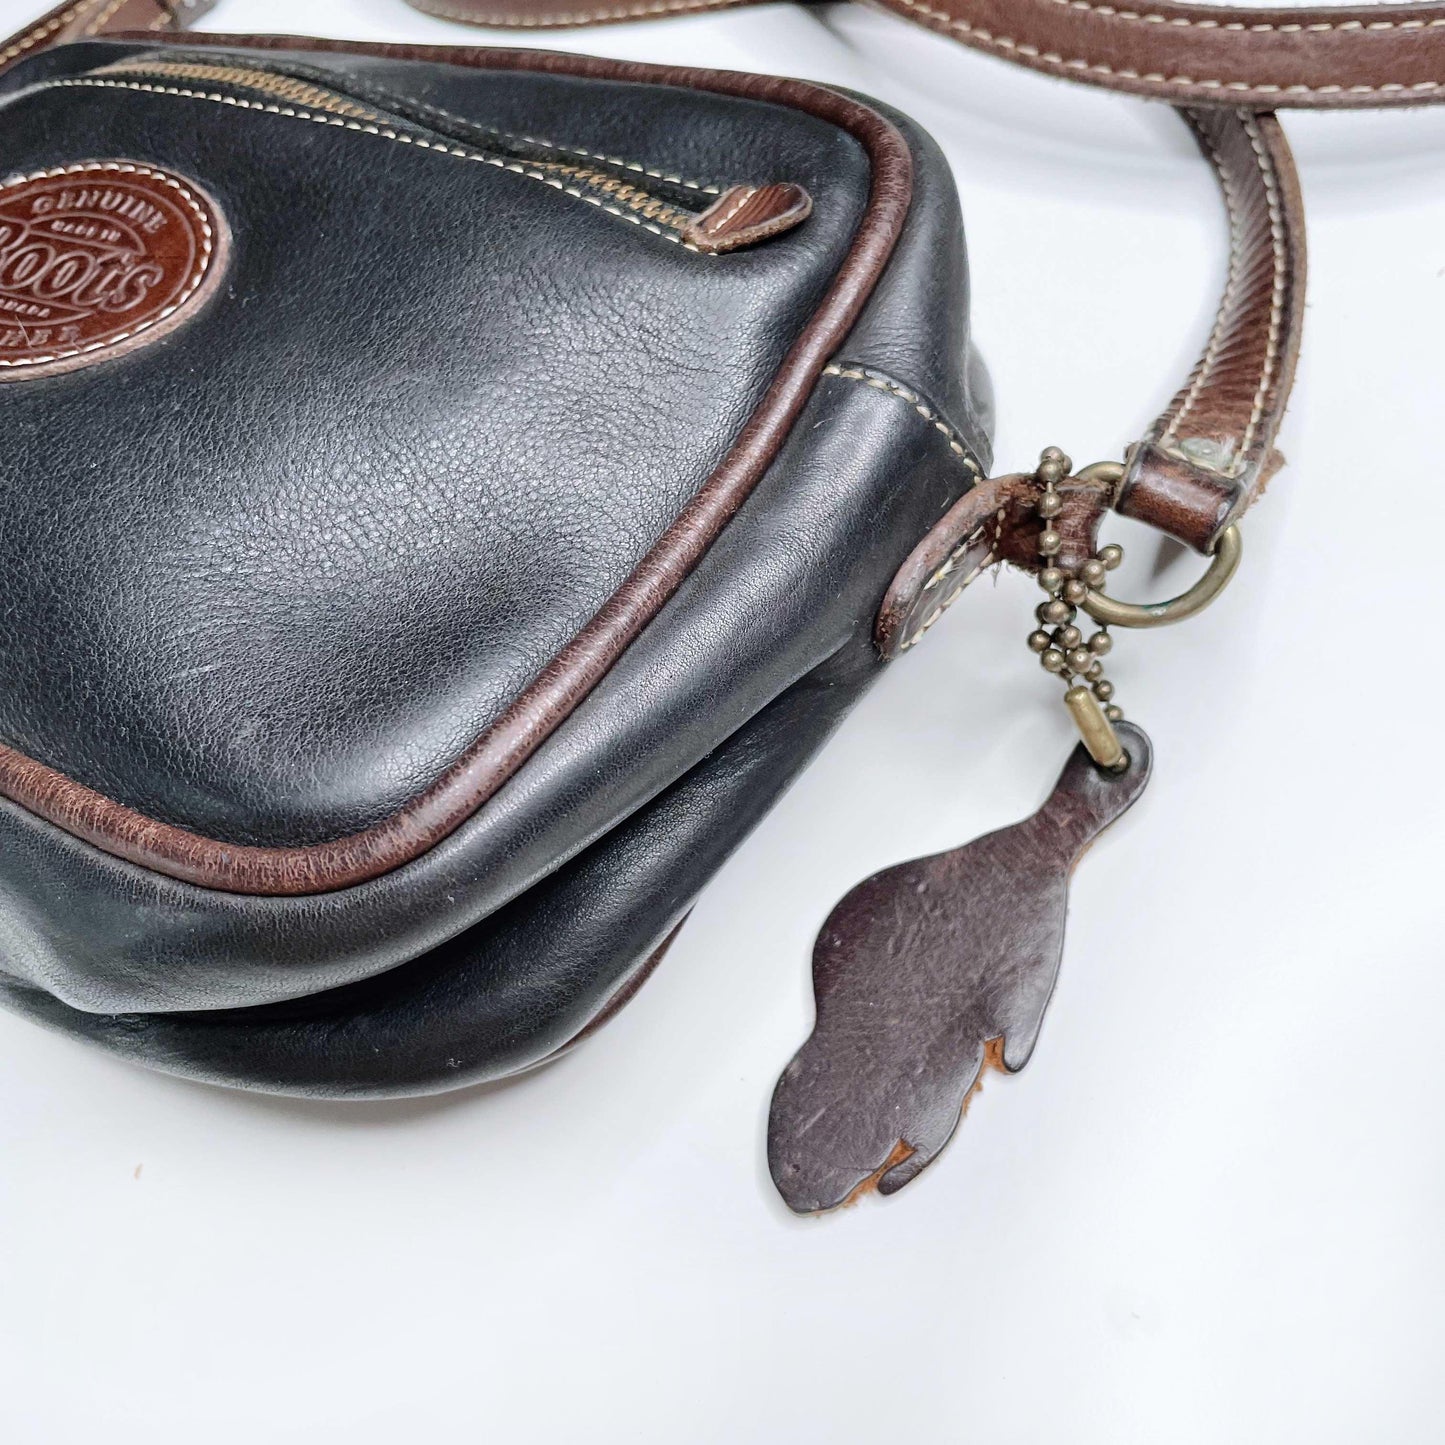 vintage 90s roots leather two-tone crossbody bag